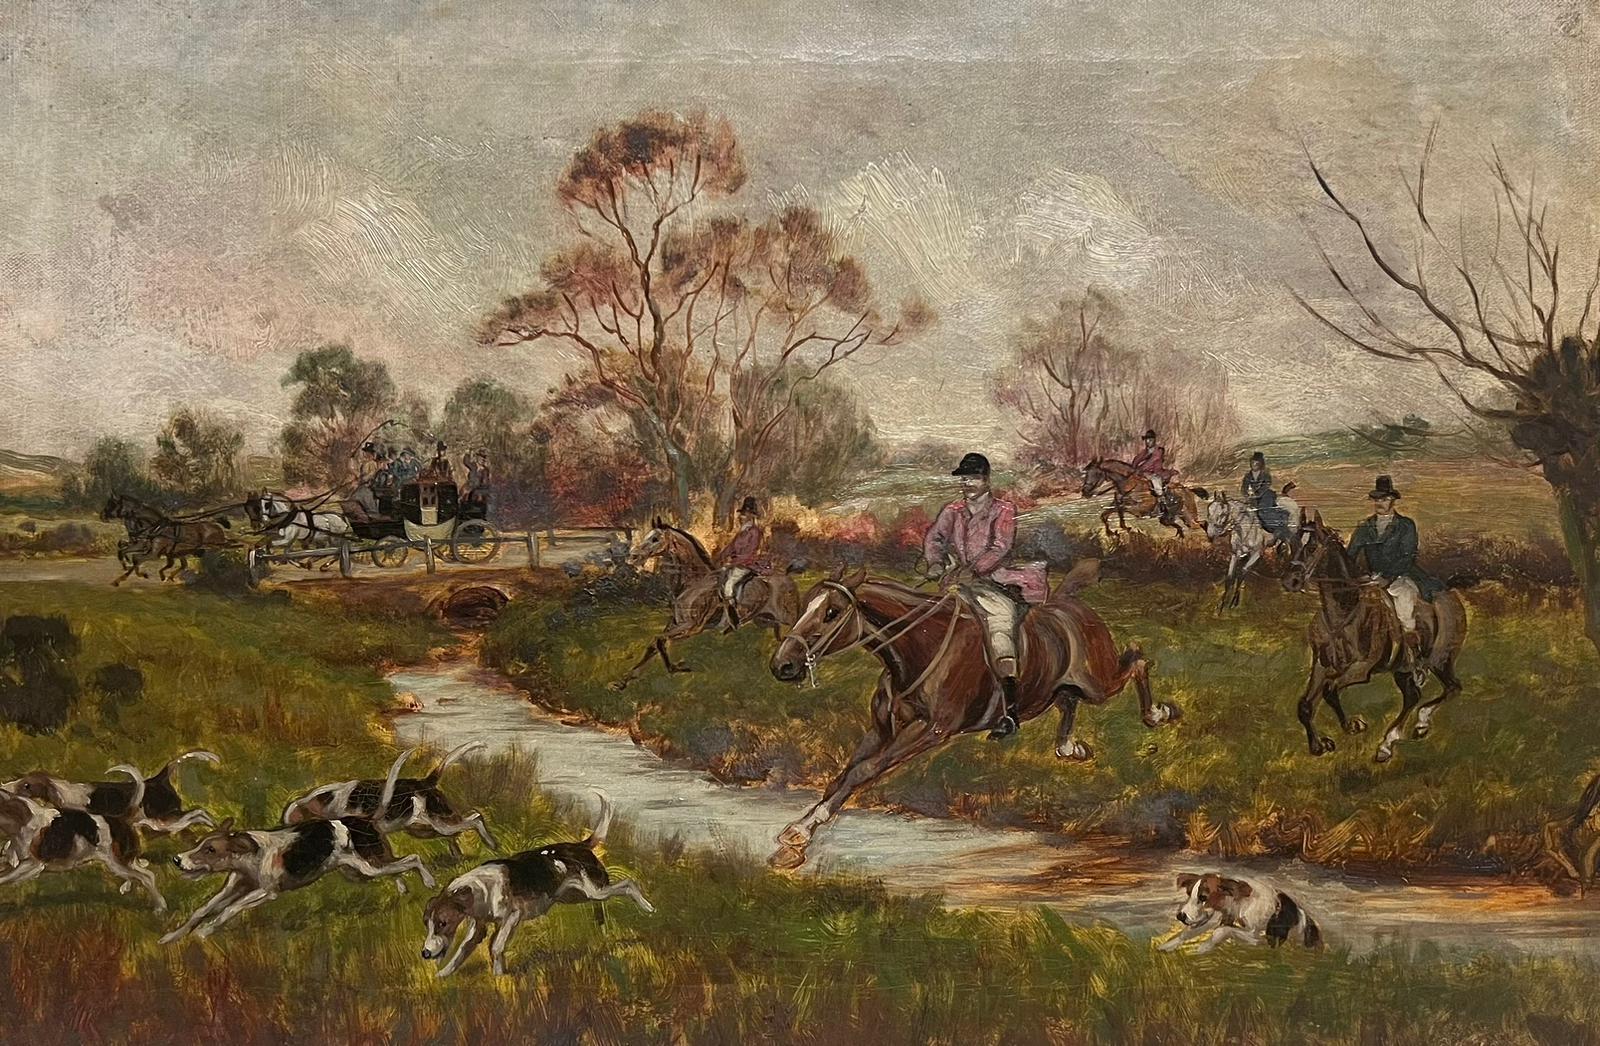 19th Century English School. Landscape Painting - Antique English Fox Hunting Oil Painting Horses & Hounds Chasing through Fields